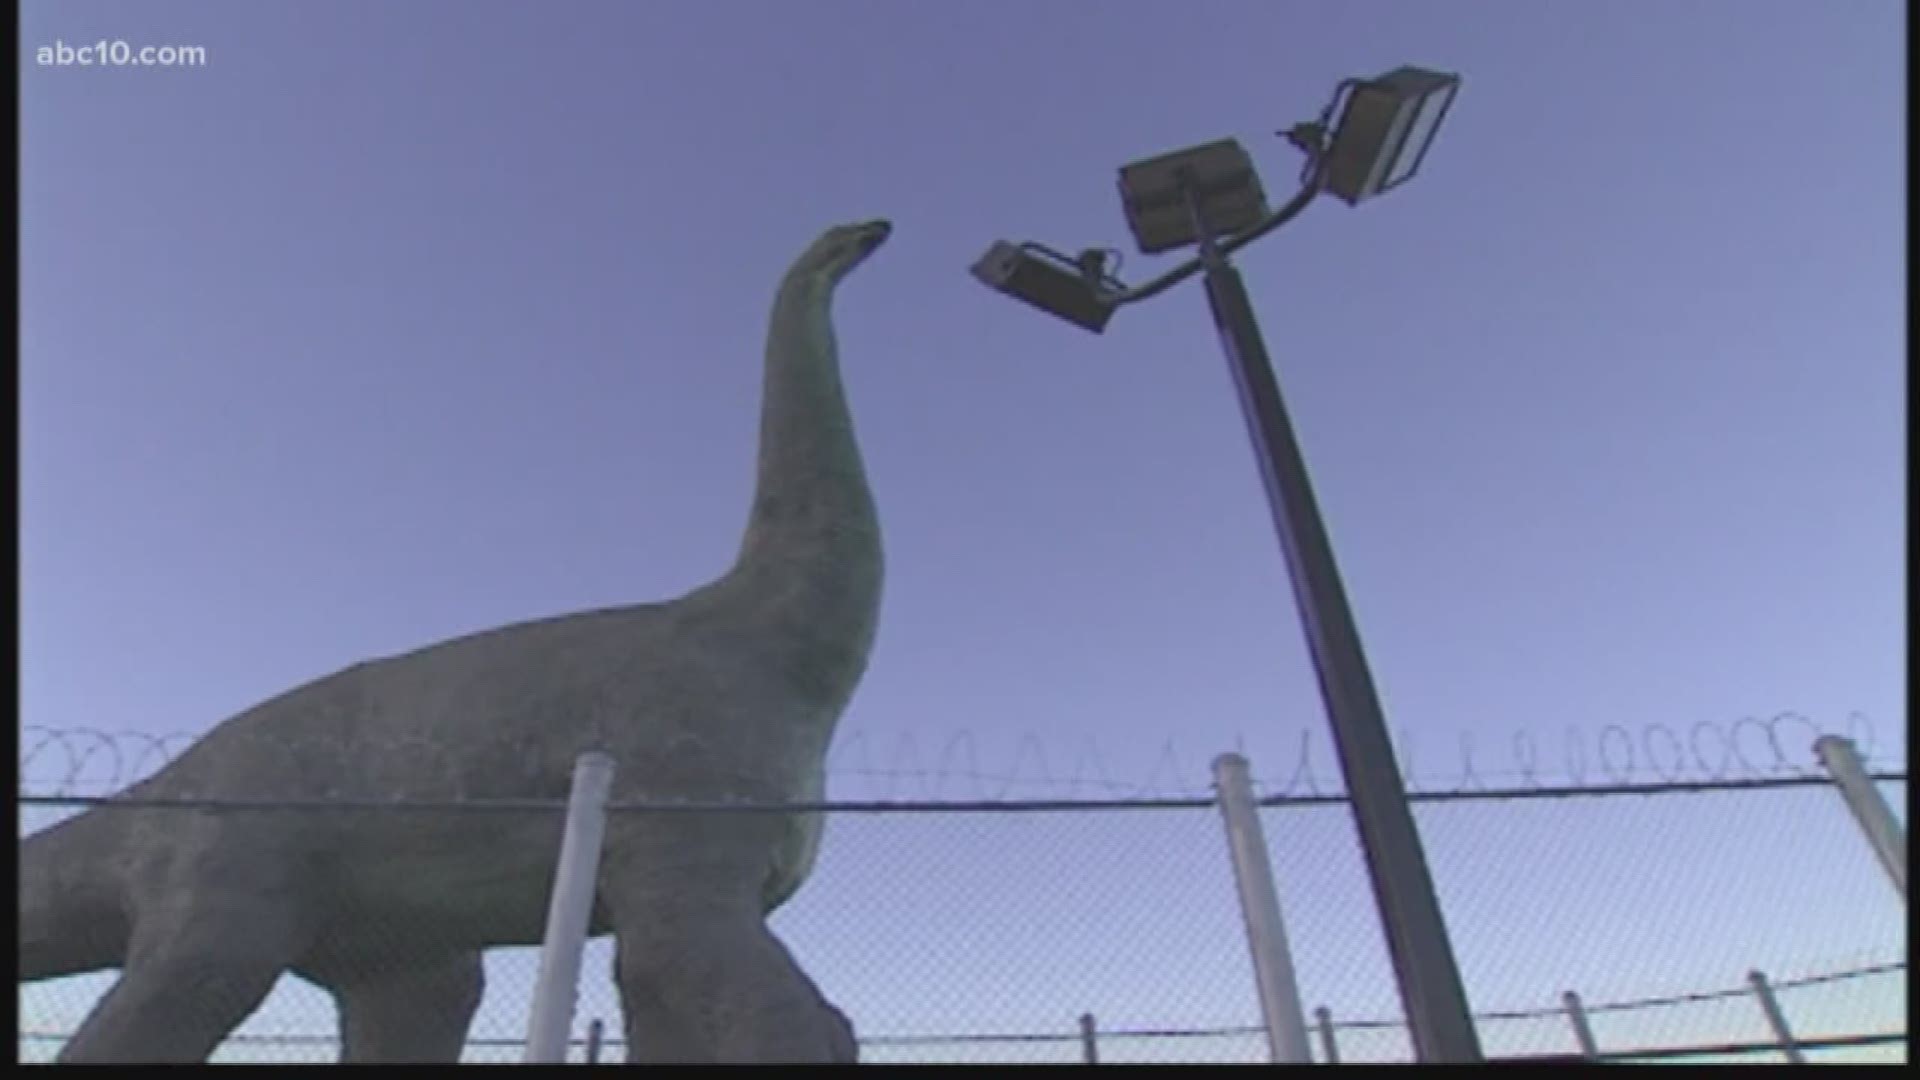 The council voted 3 to 2 in favor of dishing out $25,000 to buy the dinosaur. (May 23, 2018)